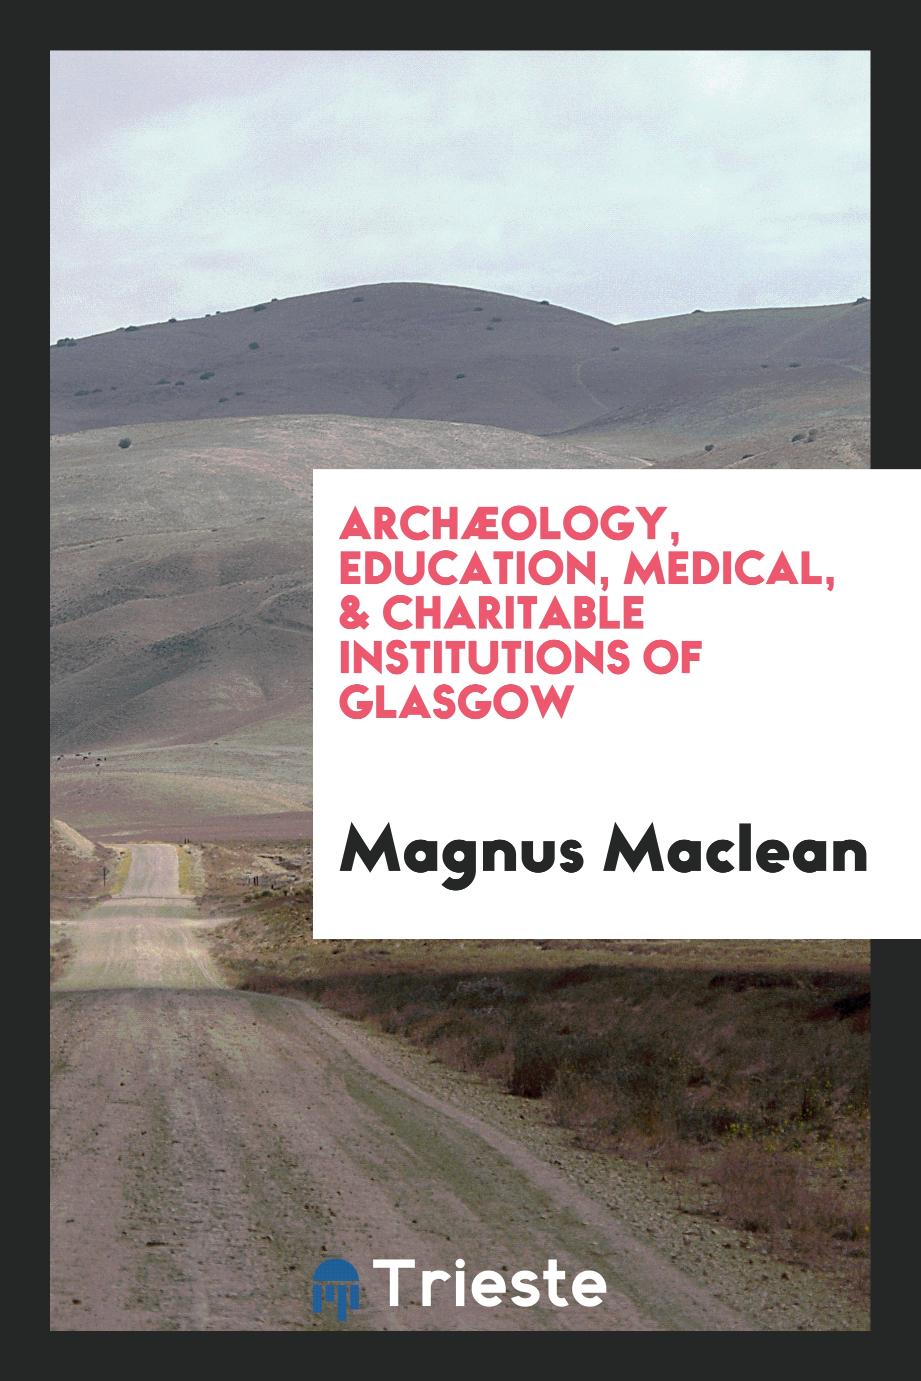 Archæology, education, medical, & charitable institutions of Glasgow